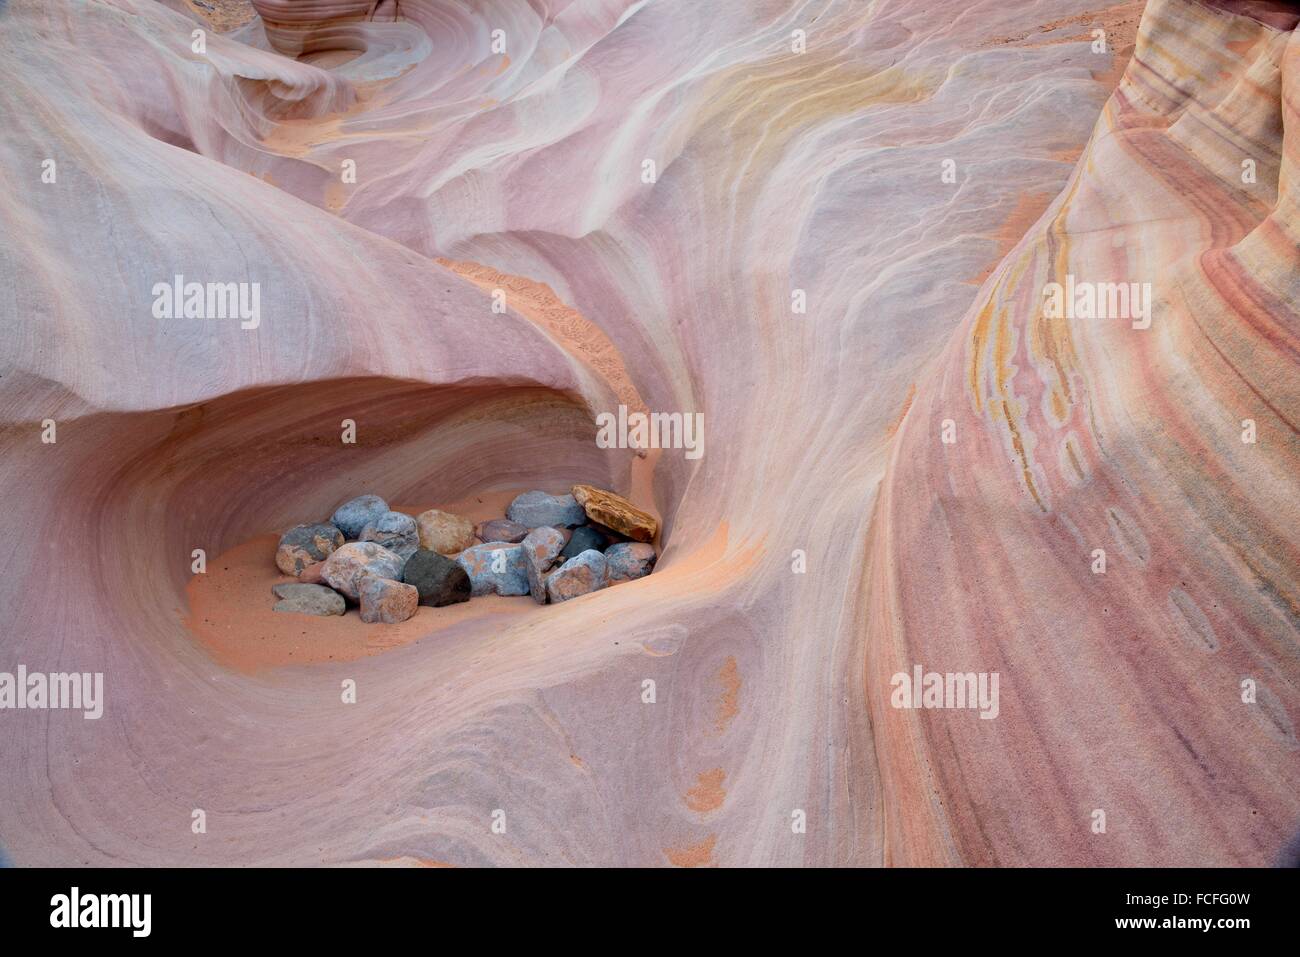 Weathered sandstones in a slot canyon- Kaolin Wash or Pink Canyon, Valley of Fire State Park, Nevada, USA. Stock Photo